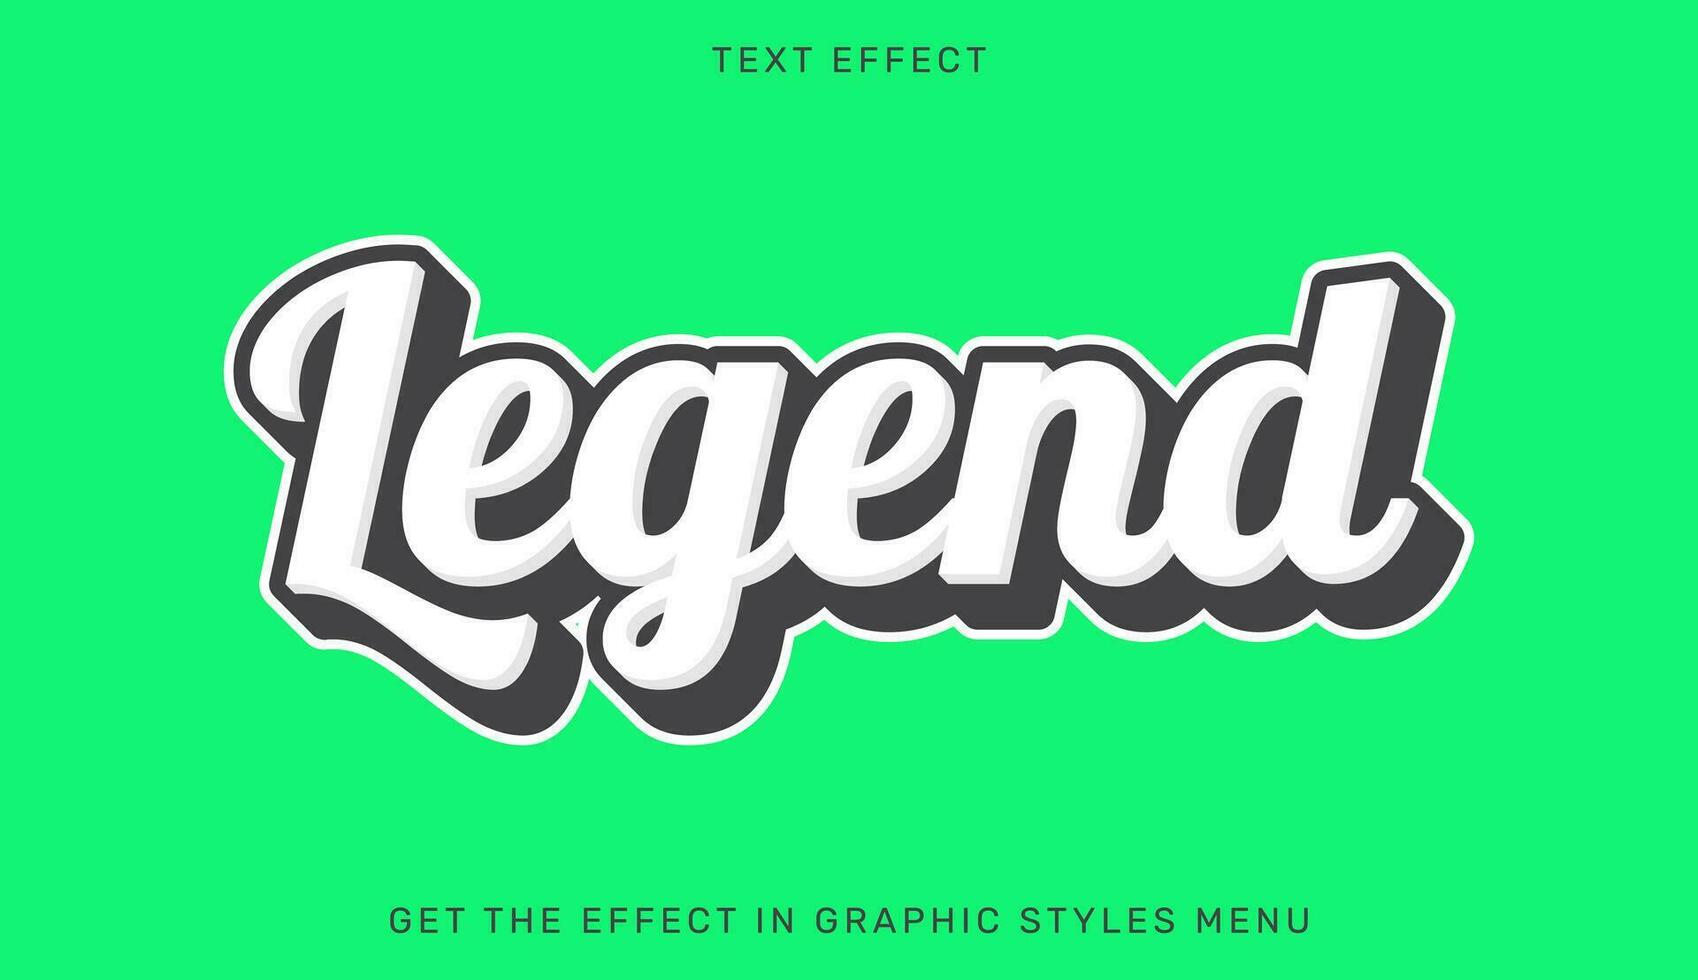 Legend editable text effect in 3d style. Text emblem for advertising, branding, business logo vector